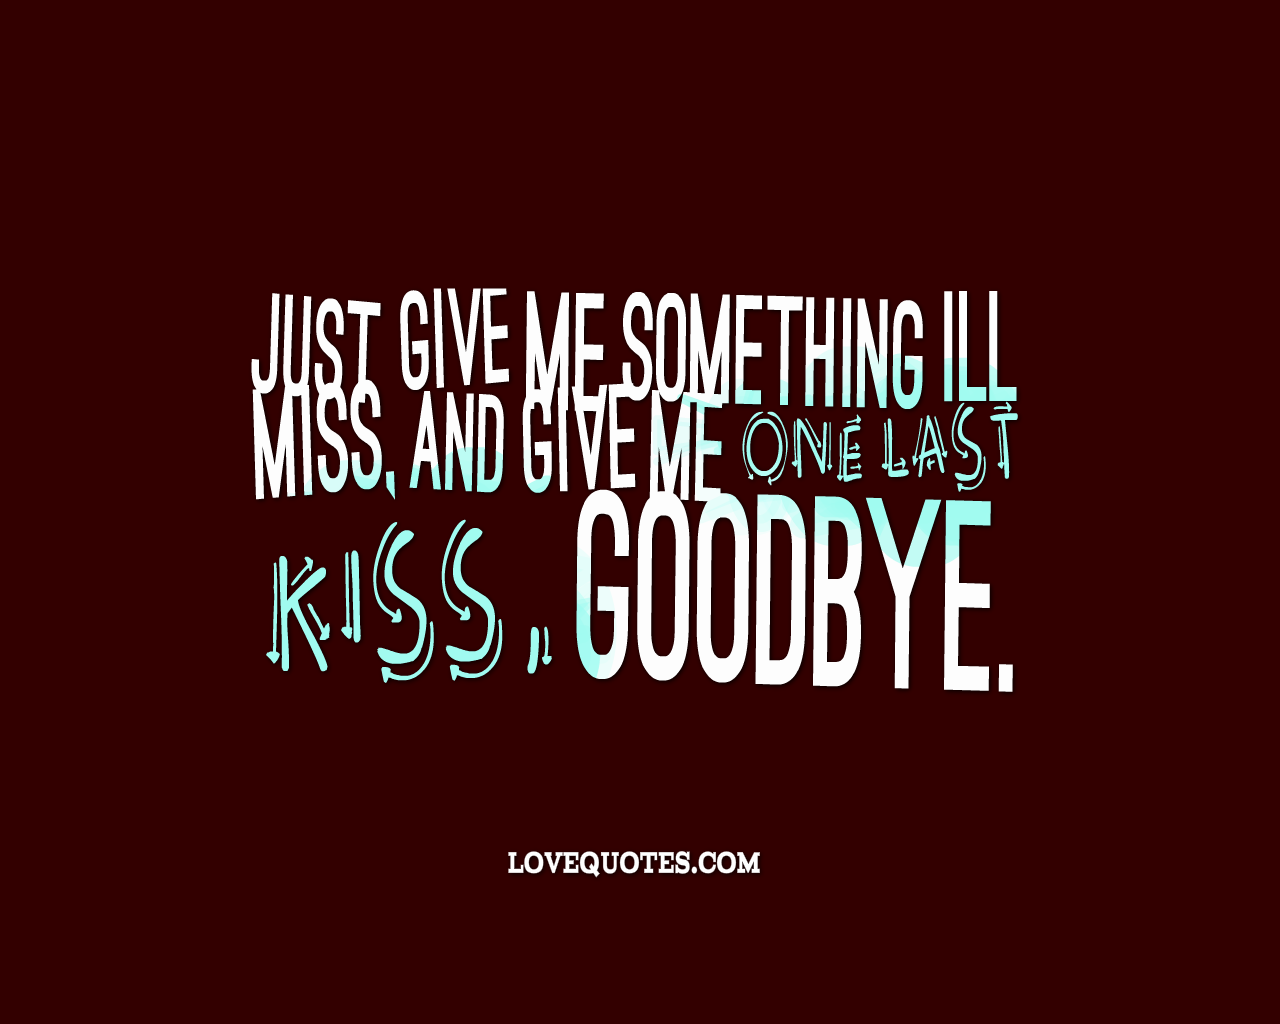 the last kiss quotes